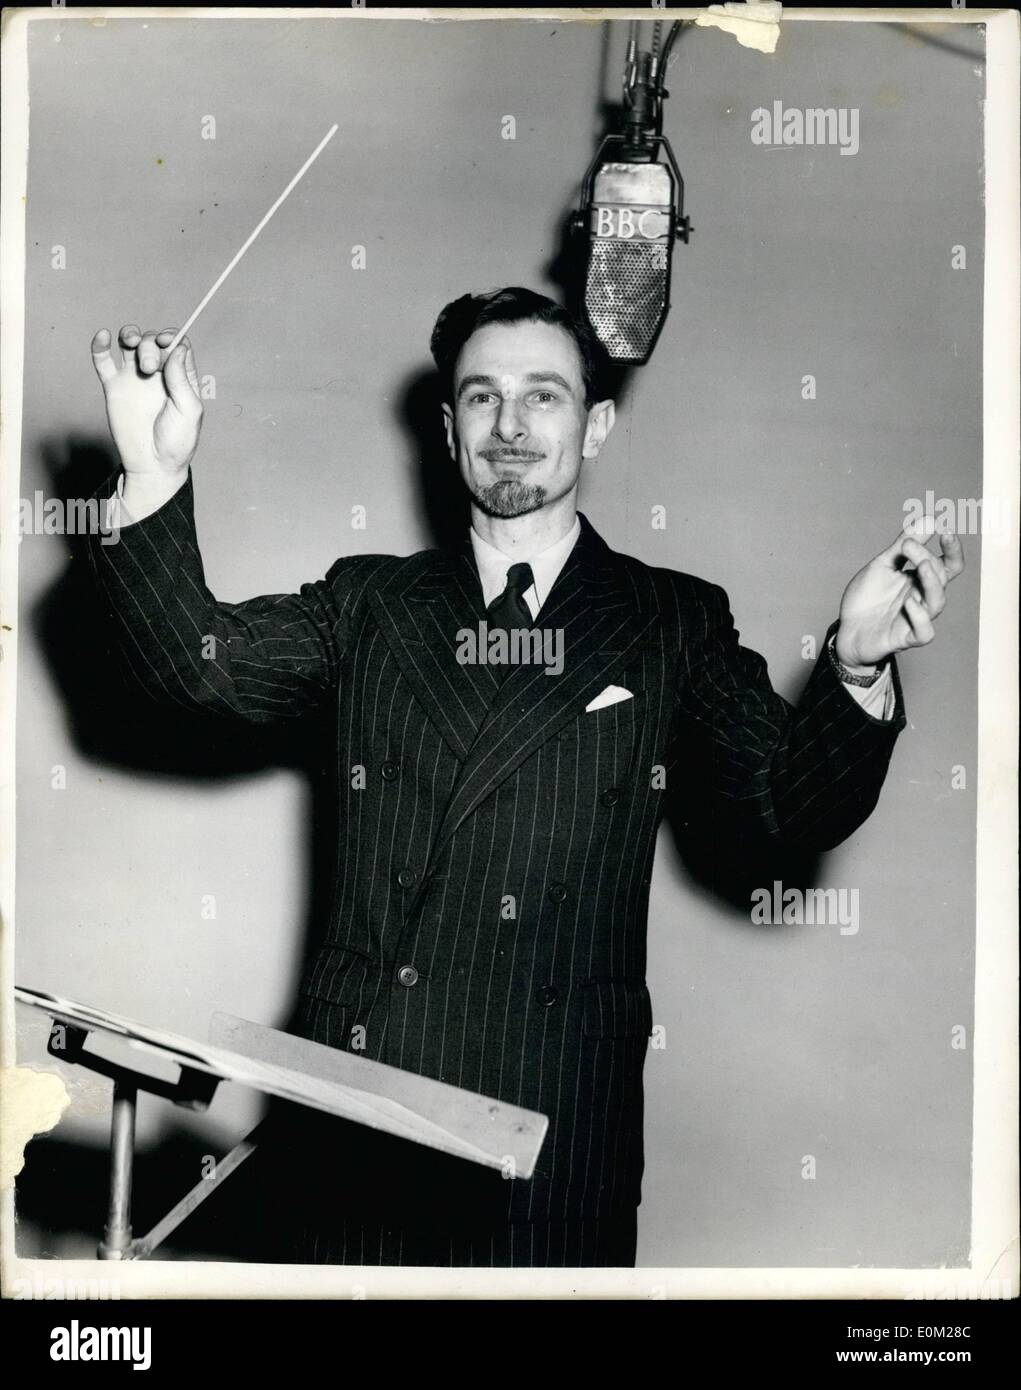 Mar. 03, 1953 - New Conductor of the B.B.C. revue orchestra Mr. Harry Rabinowitz. Photo shows Mr. Harry Rabinwitz who was born in Johannesburgh, South Africa seen at the B.B.C. this afternoon after taking up his new post as Conductor of the B.B.C. Revue Orchestra. Stock Photo